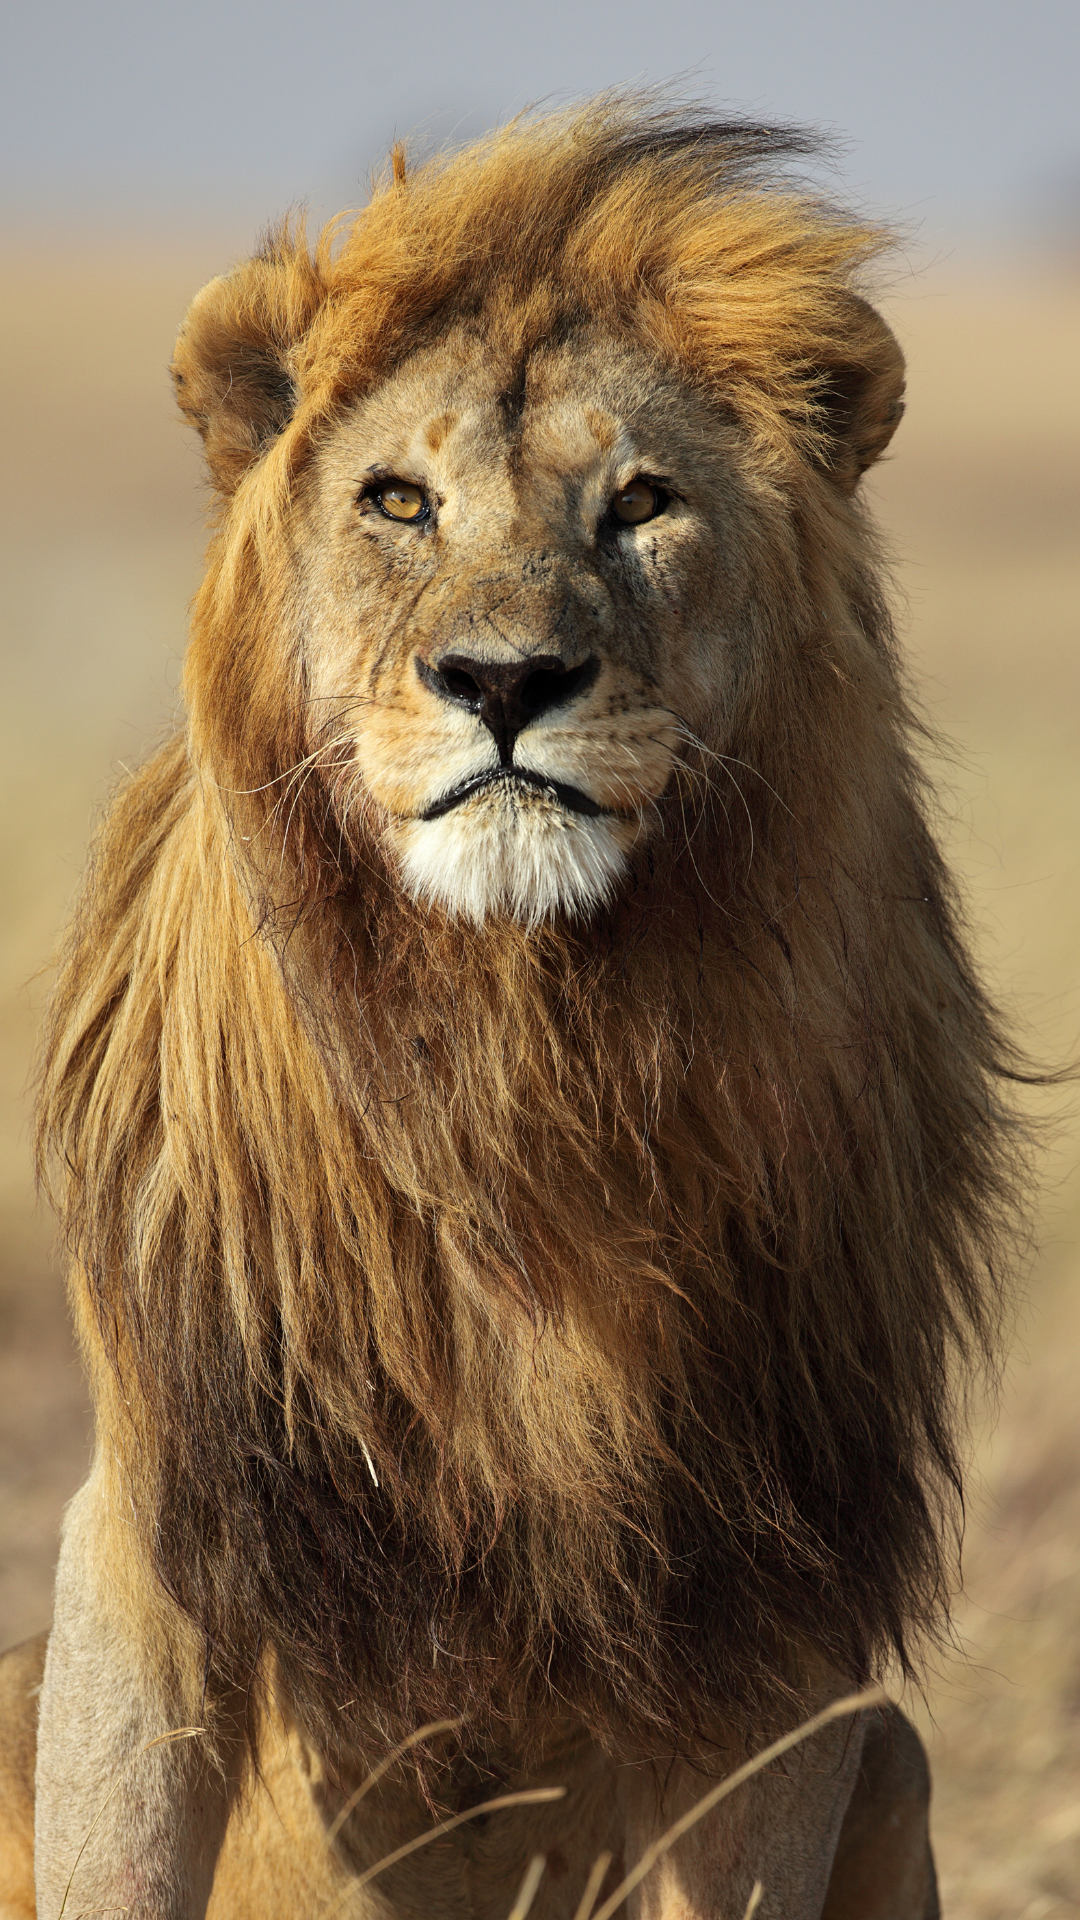 Lion wallpapers for iphone